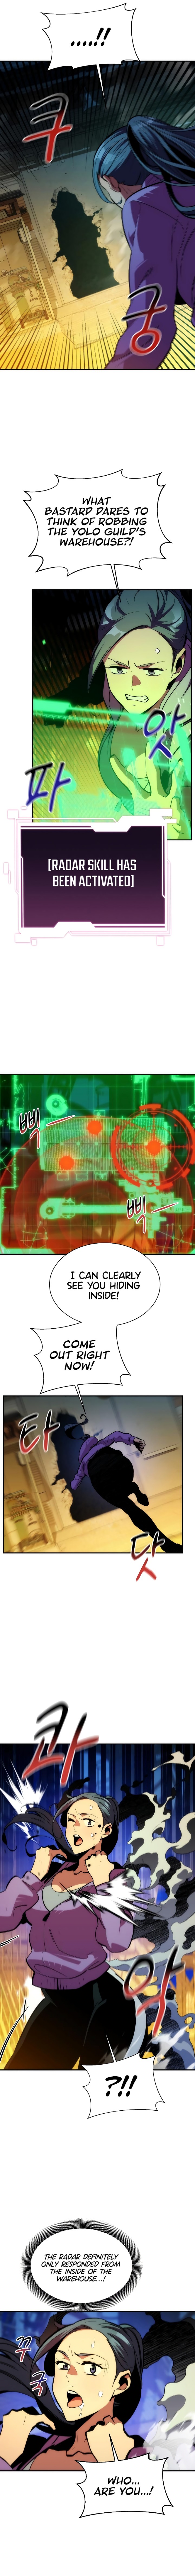 Auto-Hunting With Clones - Chapter 36 Page 2